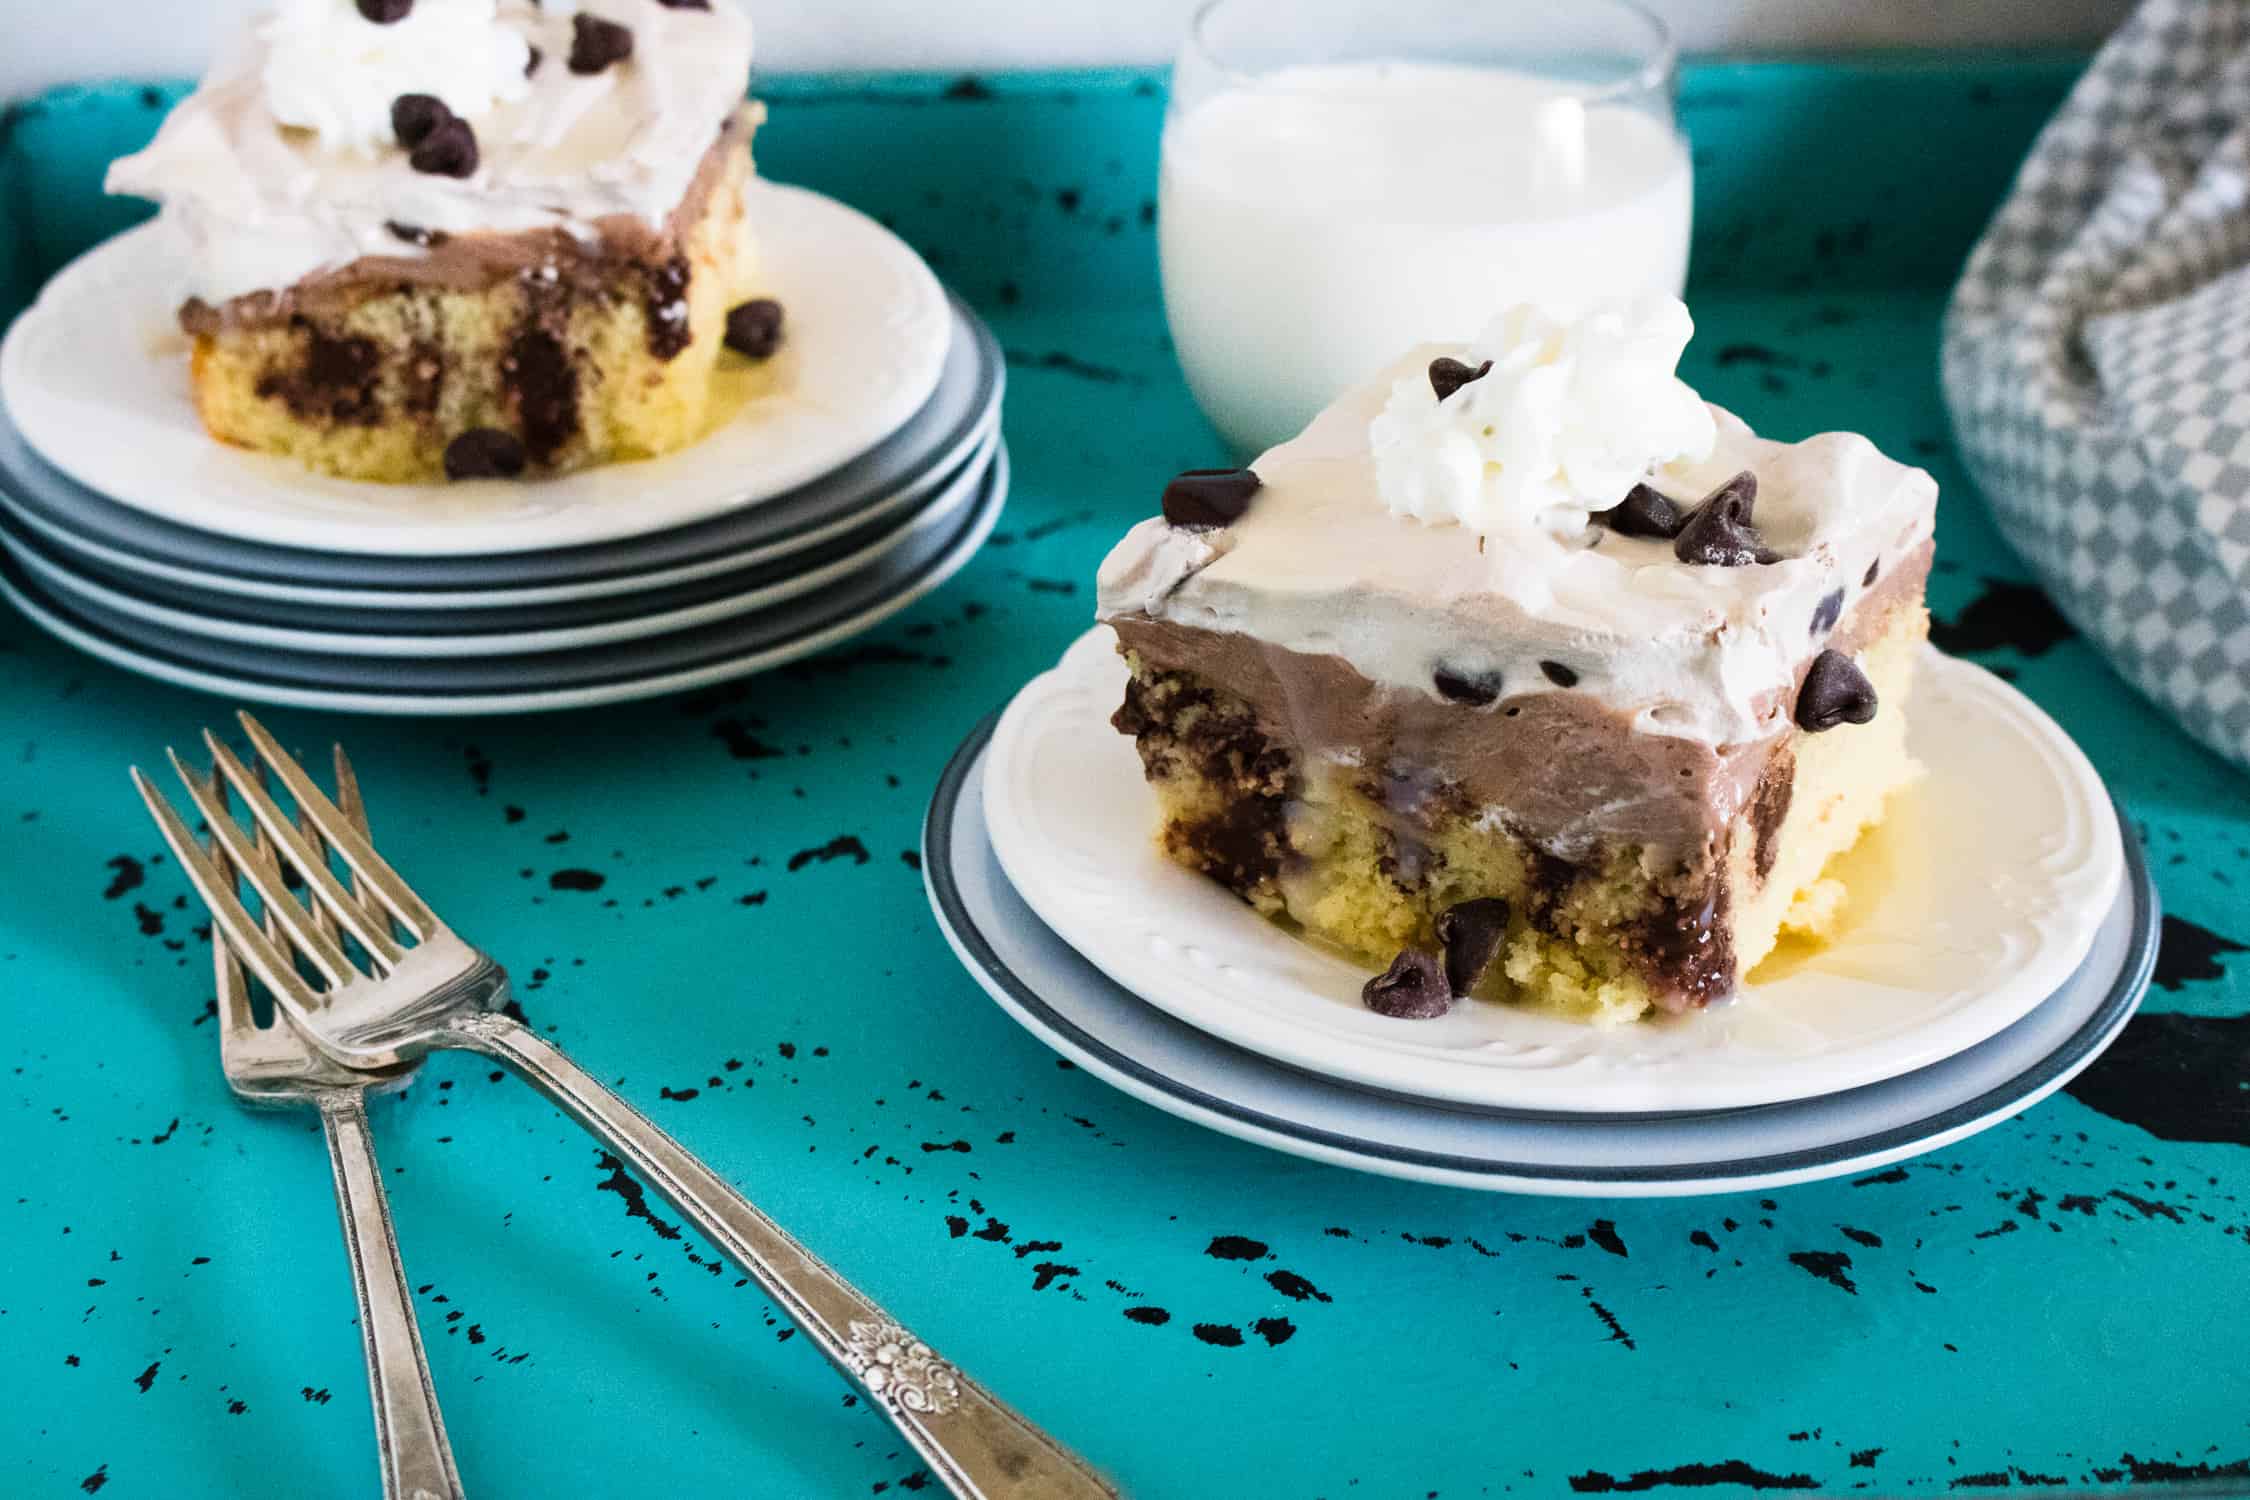 two white plates each with a piece of quadruple chocolate poke cake on them with silver forks in foreground and turquoise tablecloth underneath